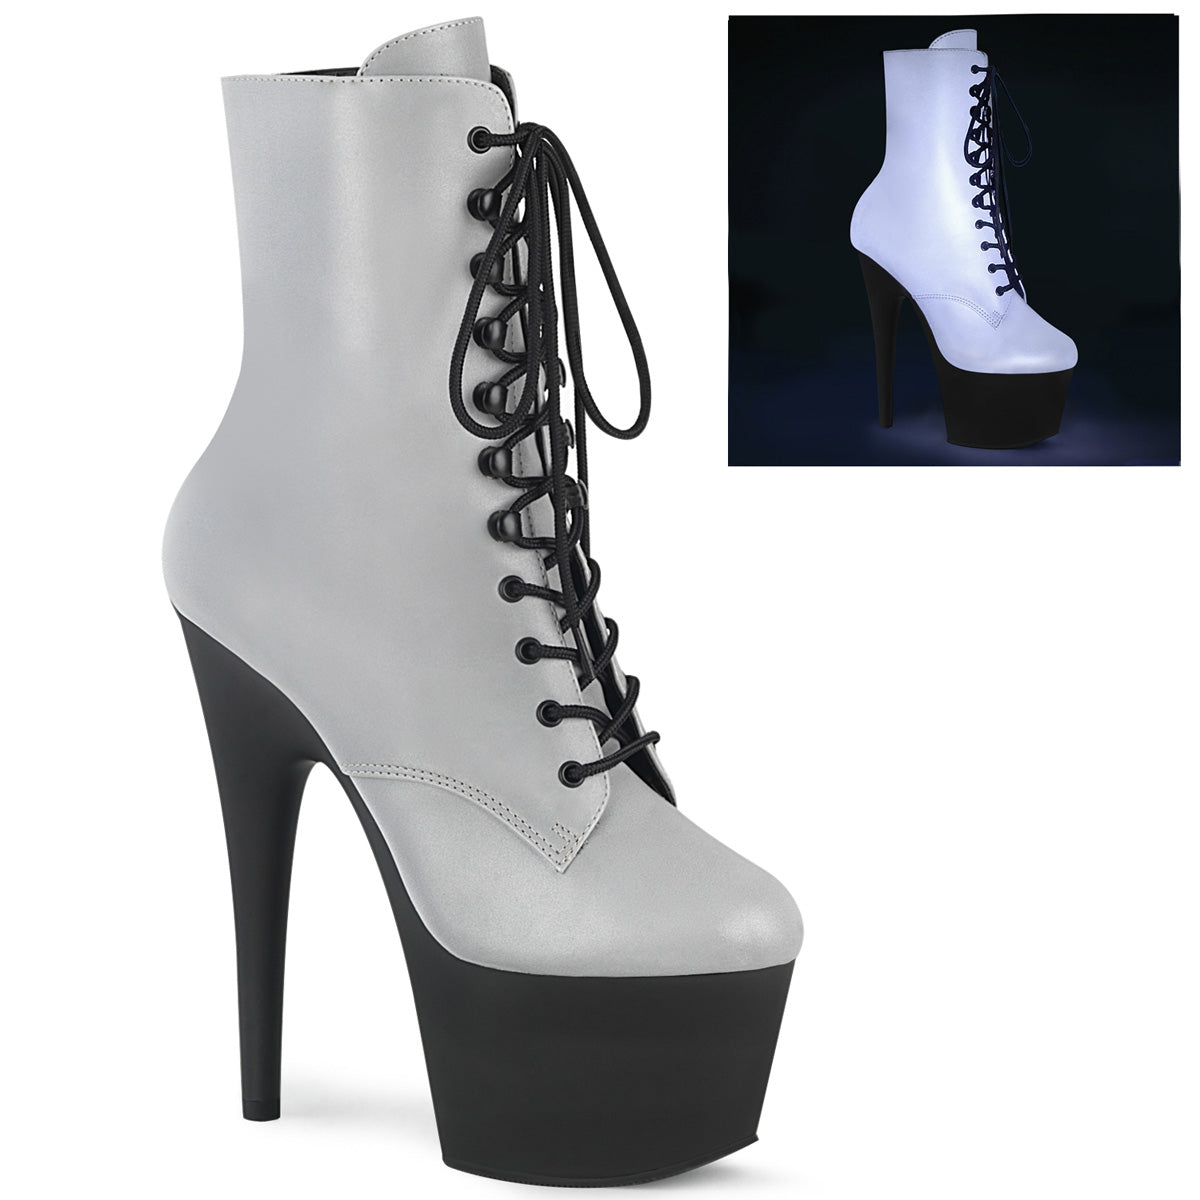 ADORE-1020REFL Pleaser Pole Dancing Shoes Ankle Boots Pleasers - Sexy Shoes